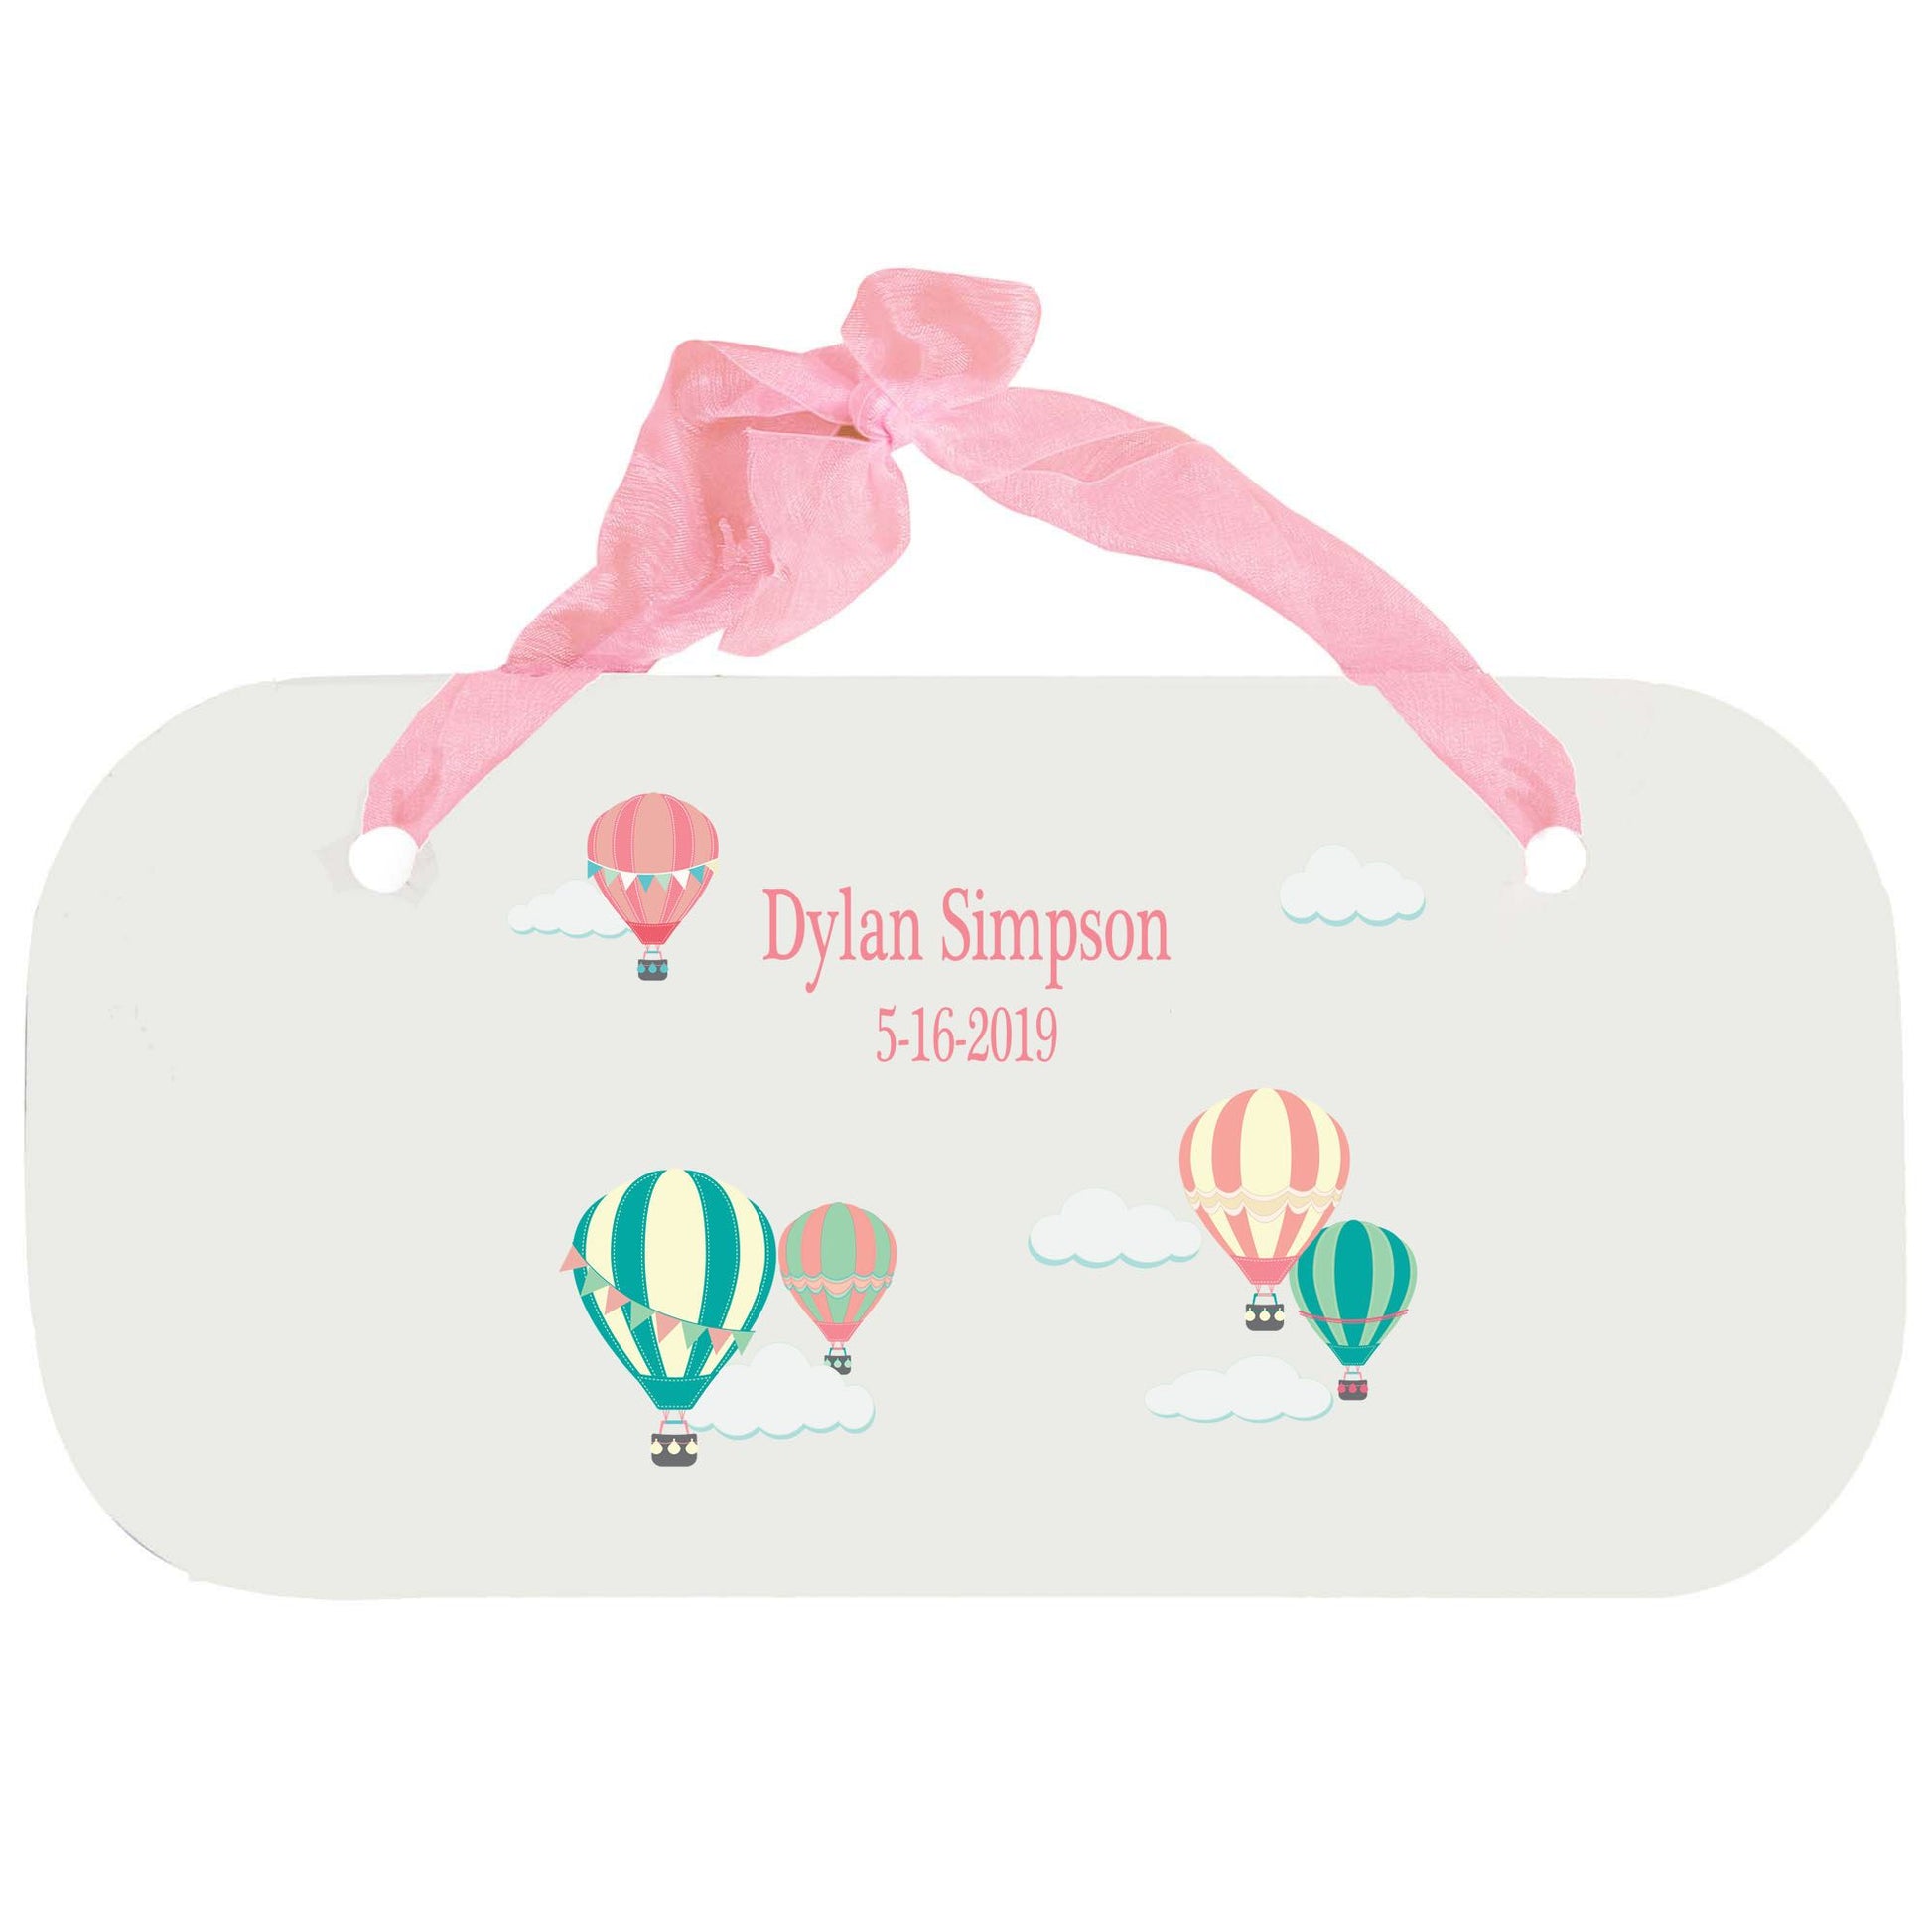 Personalized Girls Wall Plaque with Hot Air Balloon design